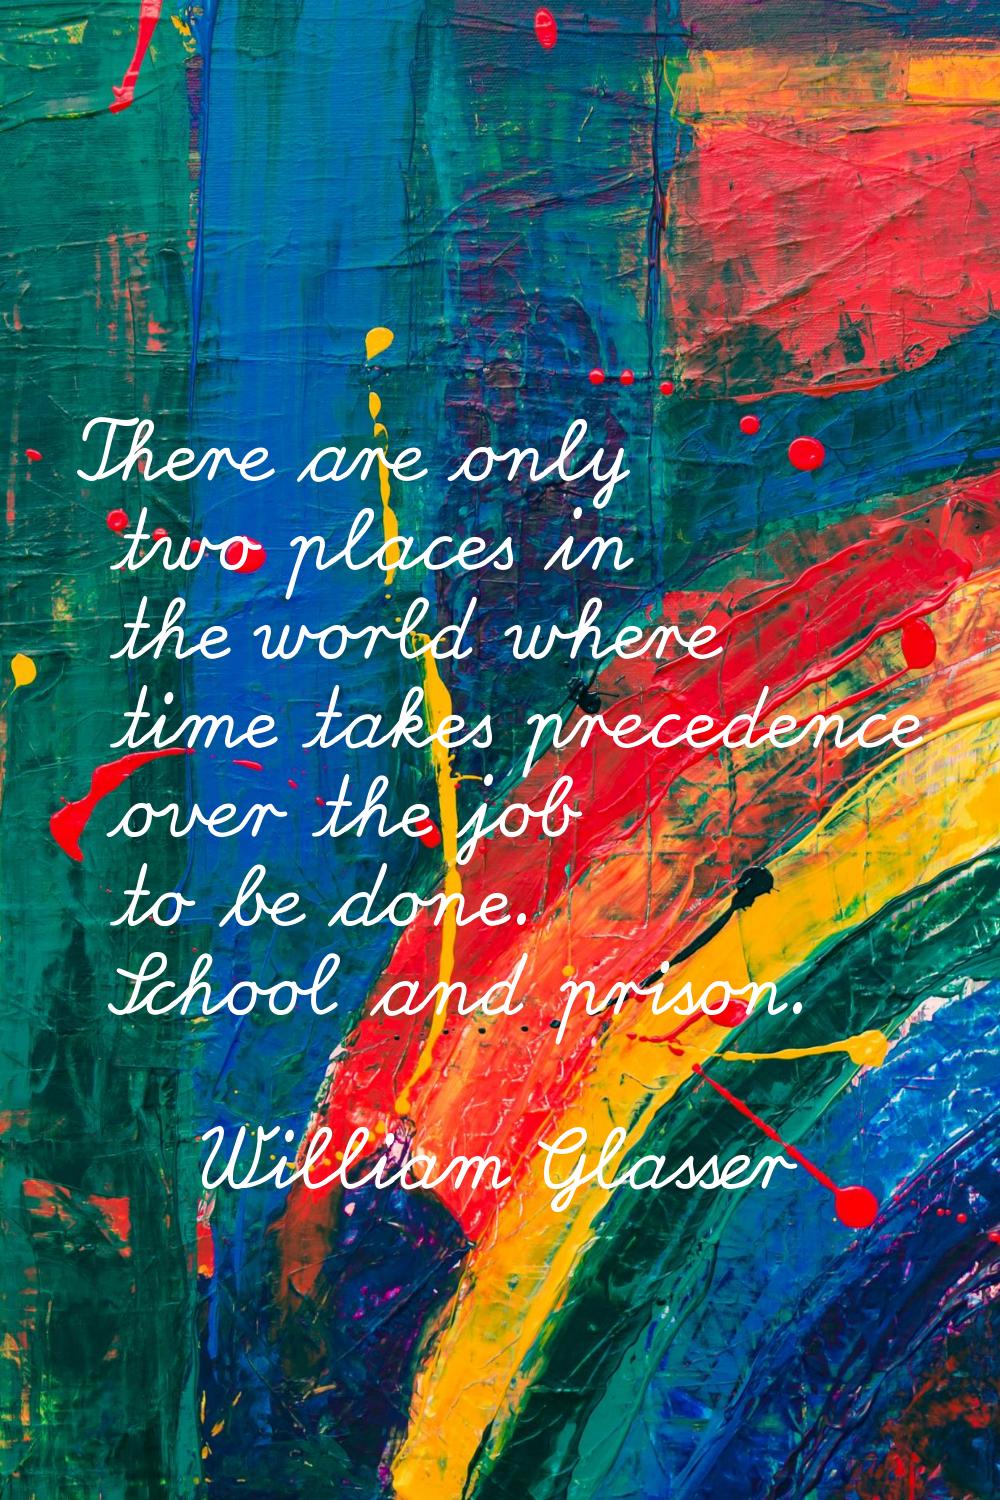 There are only two places in the world where time takes precedence over the job to be done. School 